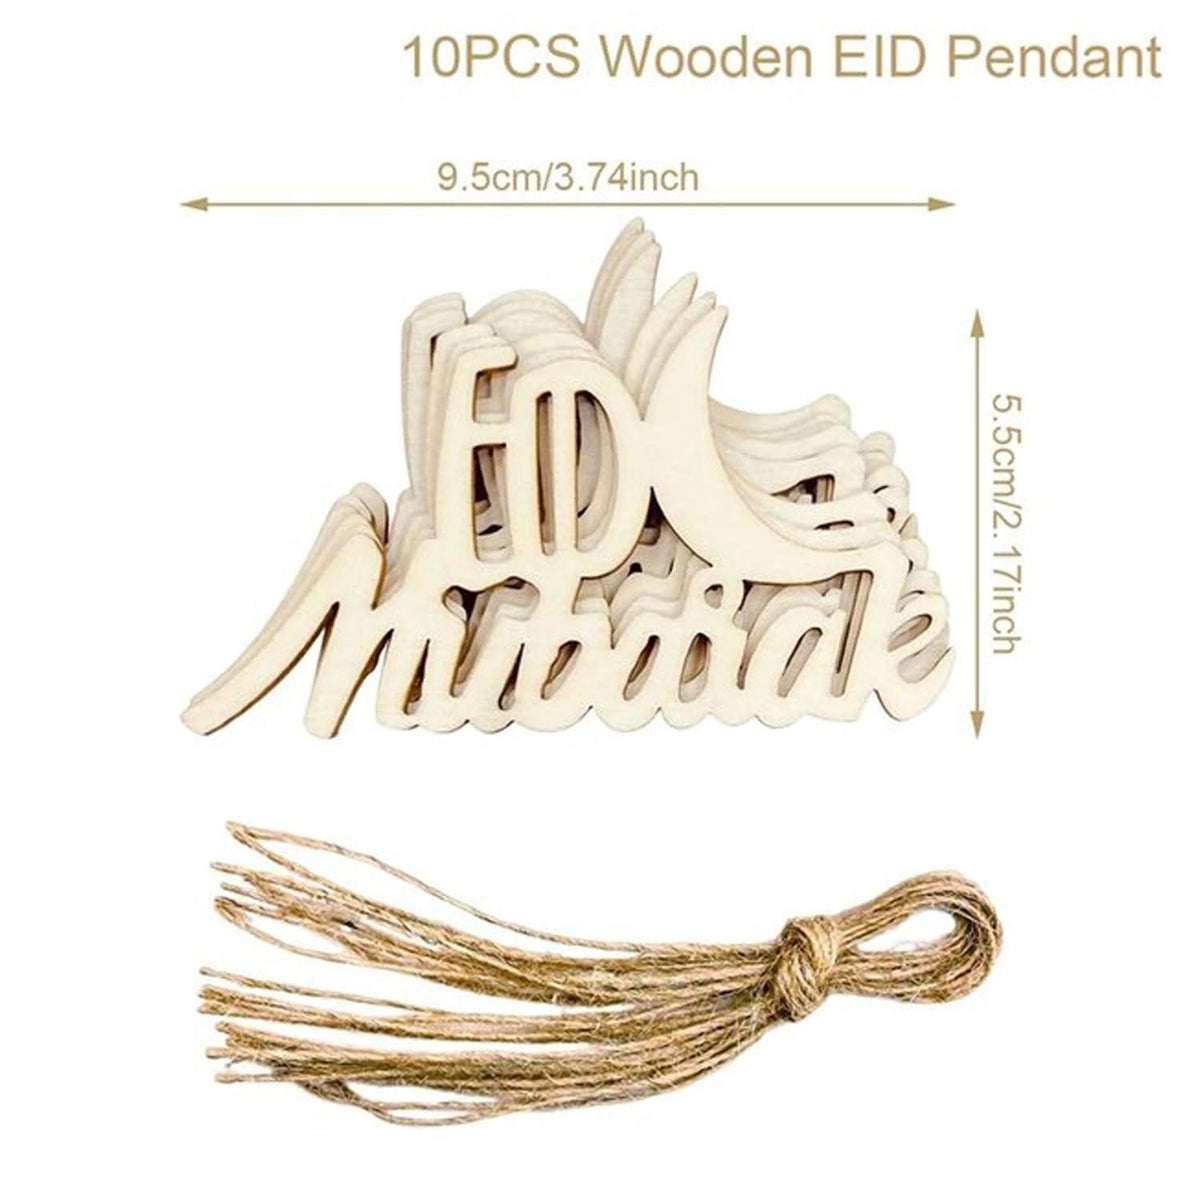 Haoser Set of 10 Eid Special Wooden Pendants, Islamic Festival Decorations, Crescent Moon and Star Design, Handcrafted Eid Mubarak Gifts, Wooden Eid Ornaments, Ramadan and Eid Home Decor (DGN-5) - Haoser